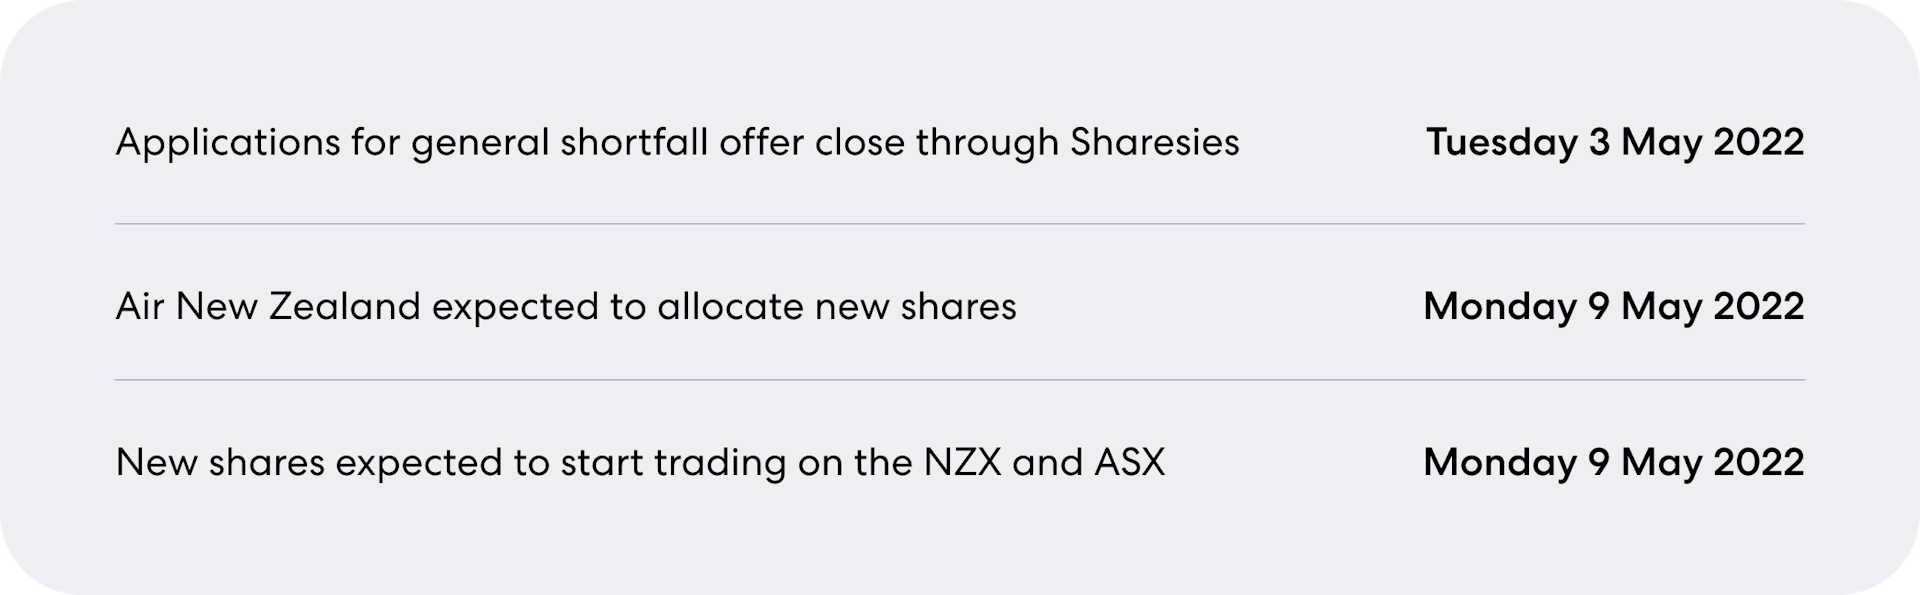 Applications for general shortfall offer close through Sharesies on Tuesday 3 May 2022. Air New Zealand expected to allocate new shares on Monday 9 May 2022. New shares expected to start trading on the NZX and ASX on Monday 9 May 2022.